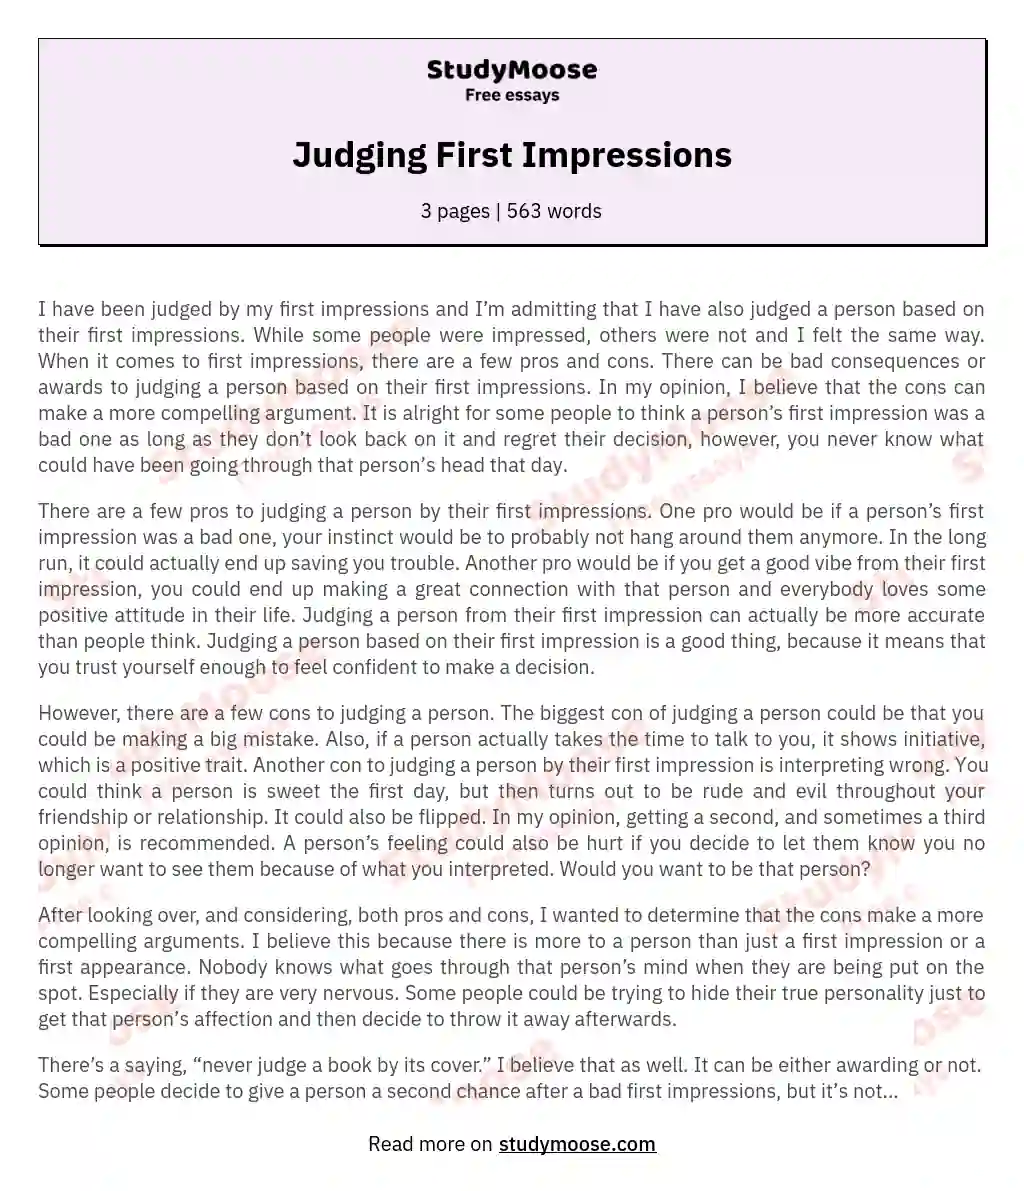 Judging First Impressions